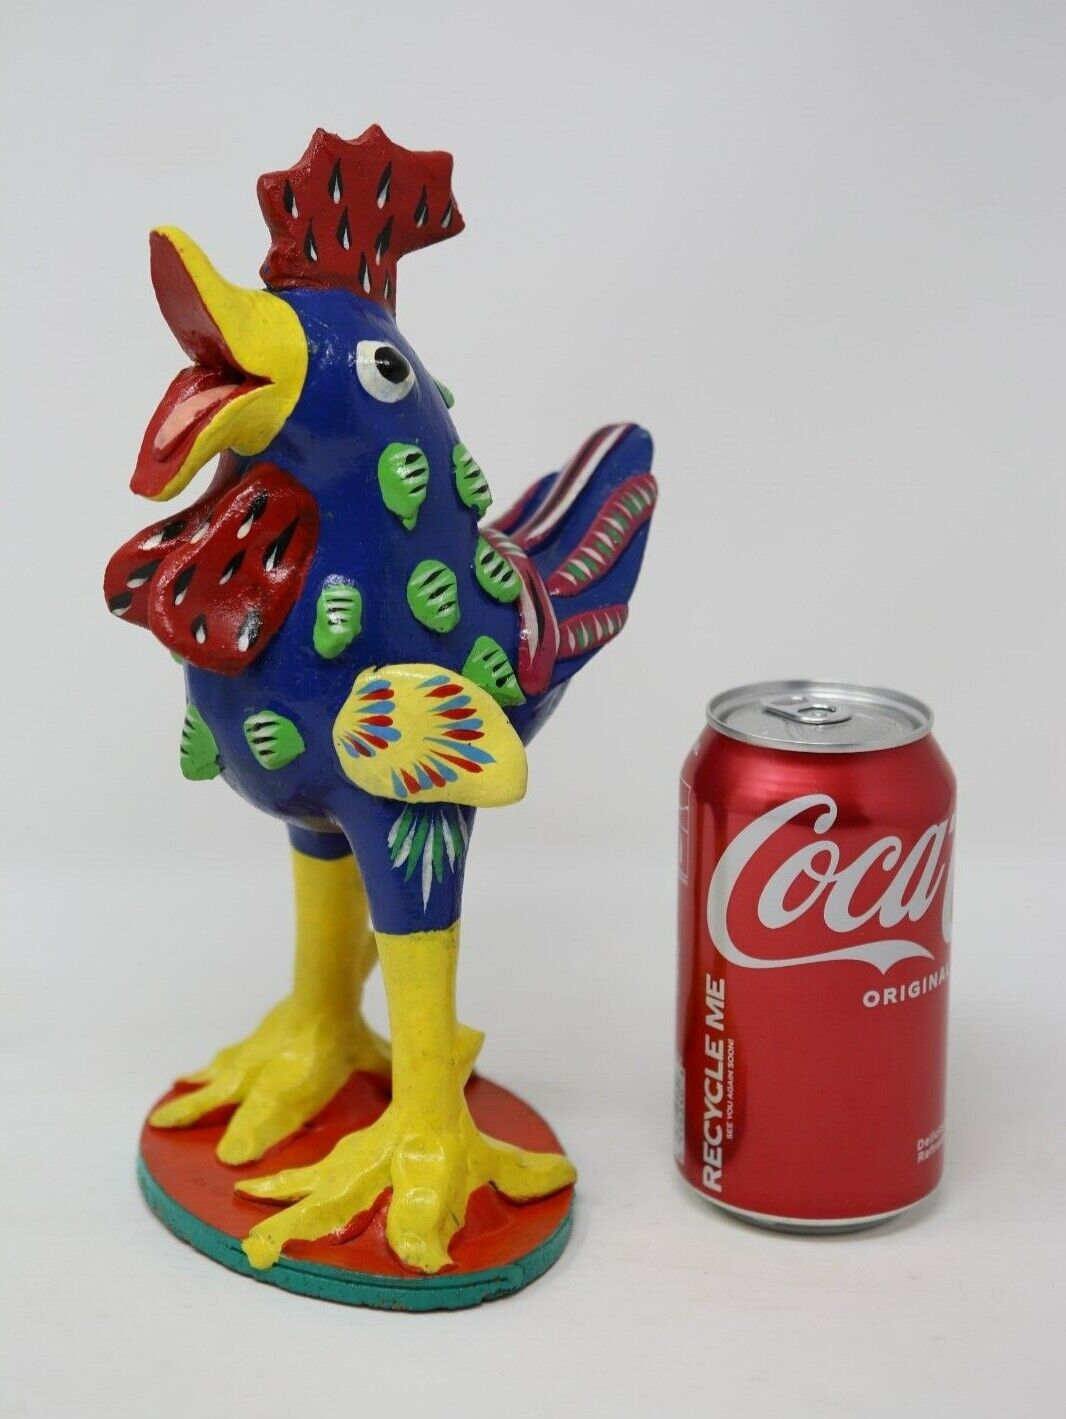 Colorful Ceramic Rooster Figurine Handpainted Hecho En 10” Christmas Gift